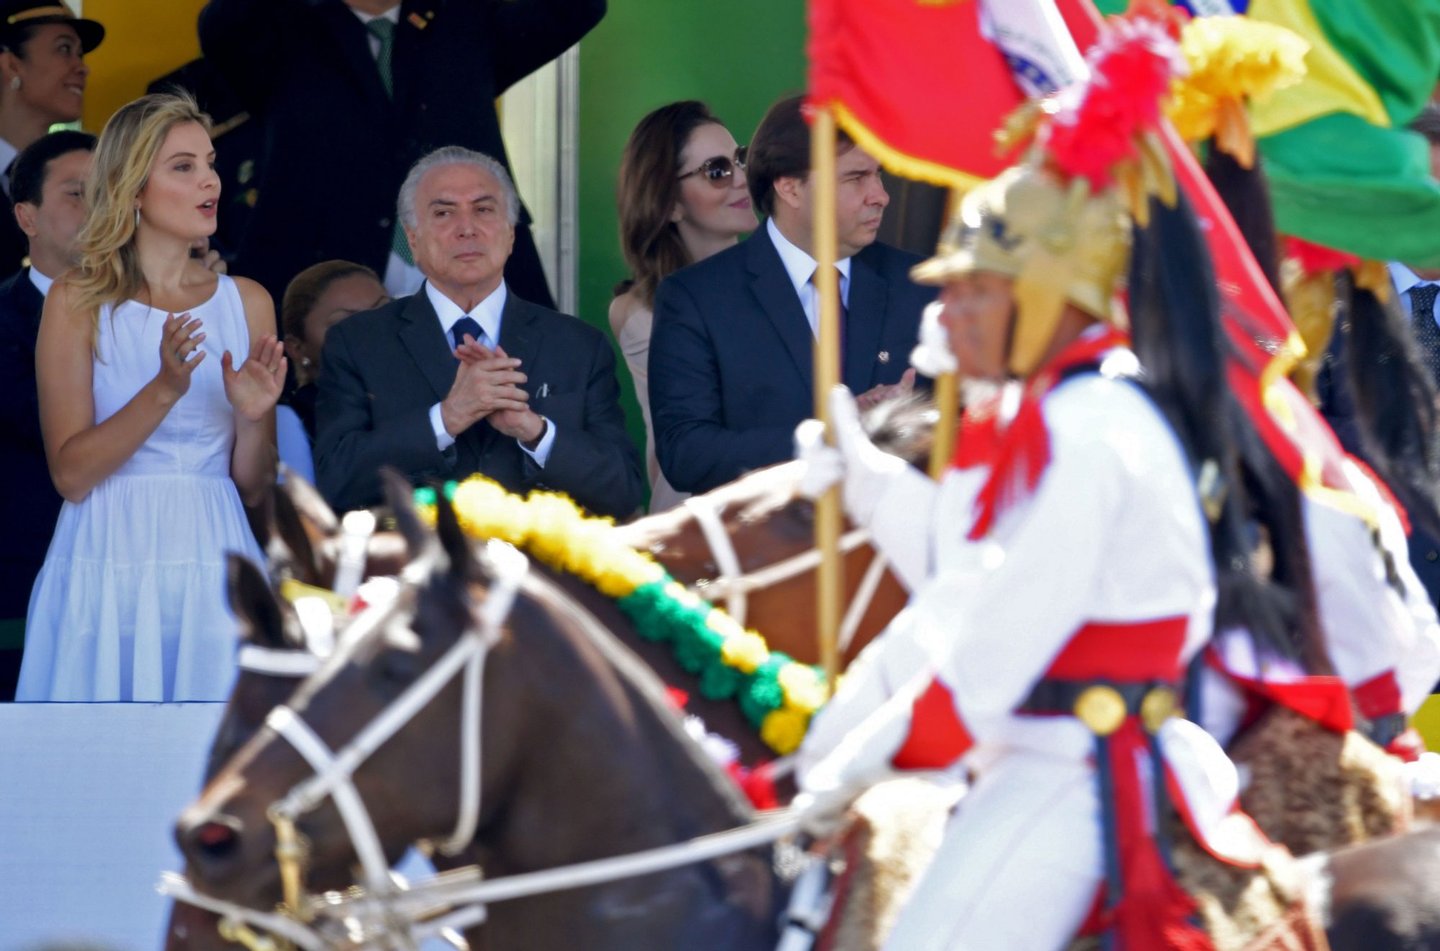 Brazilian President Michel Temer and his wife Marcela (L) attend a National Day parade during the commemoration of the country's Independence Day, in Brasilia on September 7, 2016. / AFP / EVARISTO SA (Photo credit should read EVARISTO SA/AFP/Getty Images)